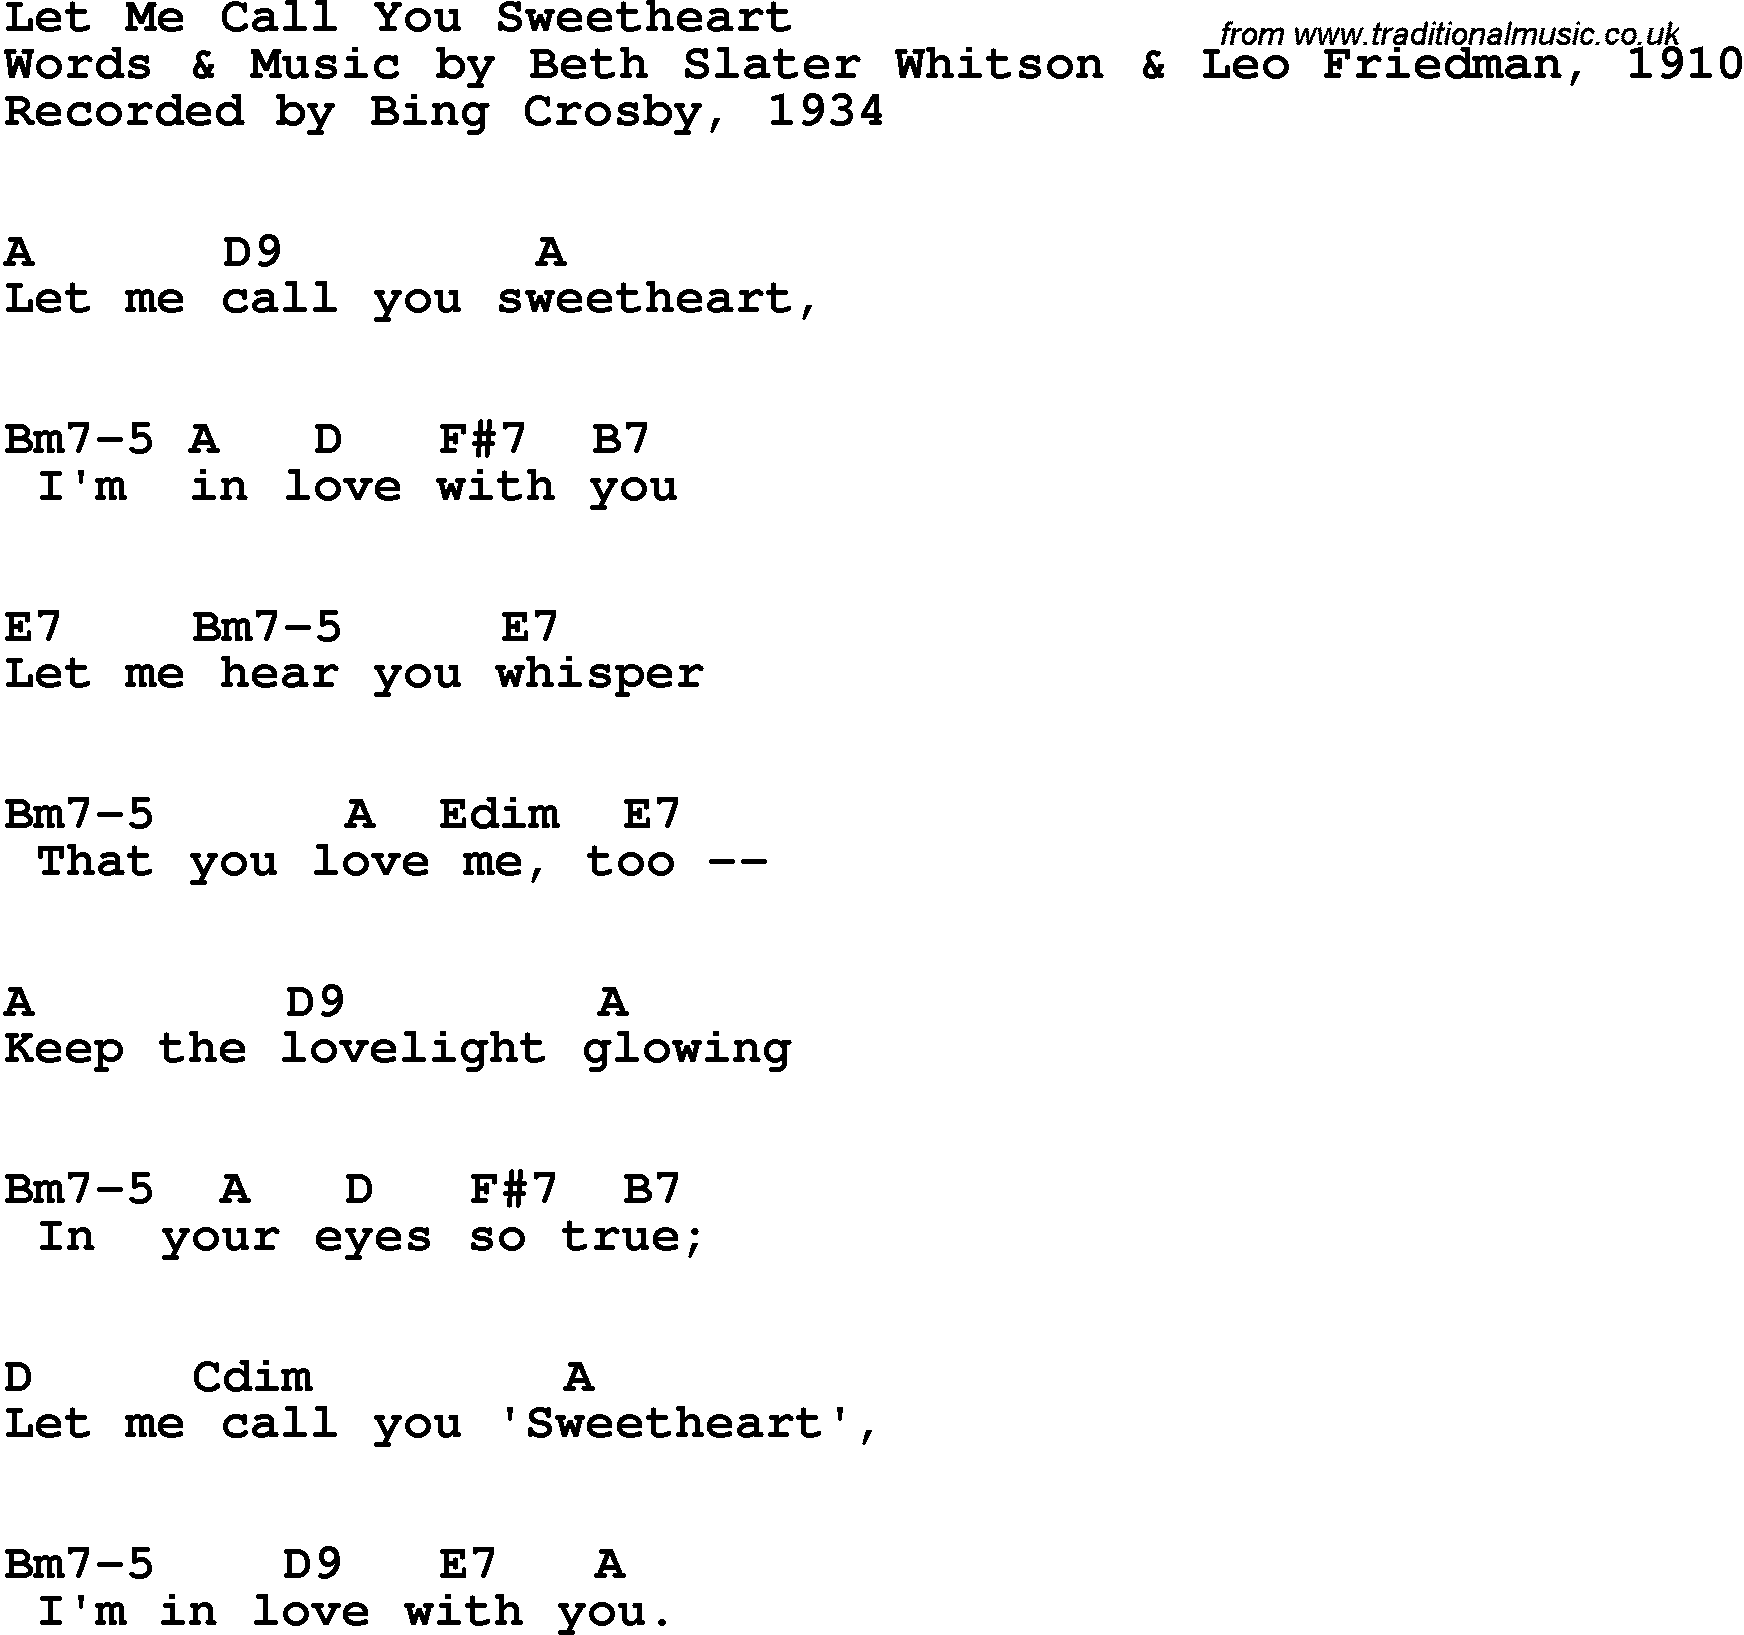 Song Lyrics with guitar chords for Let Me Call You Sweetheart - Bing Crosby, 1934